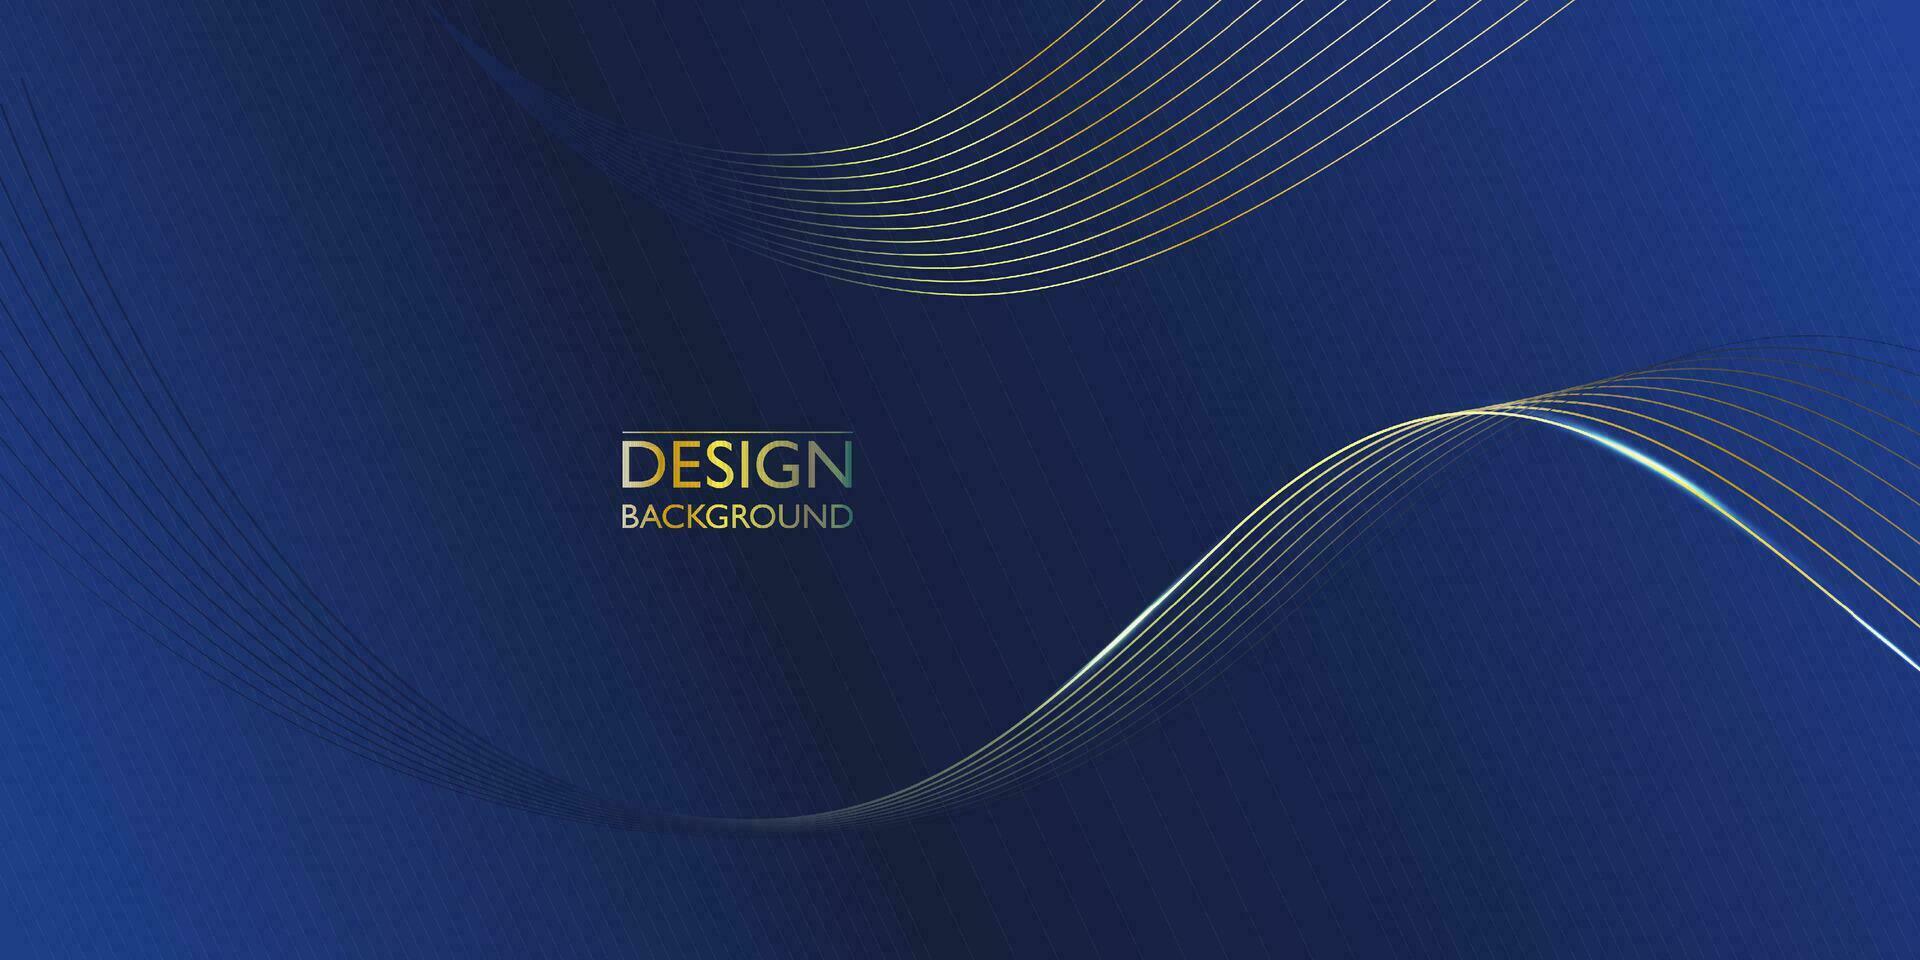 Abstract luxury gold blue wave template design. Contemporary style graphic. Vector illustration for presentation, banner, cover, web, flyer, card, poster, wallpaper, texture, slide, social media.